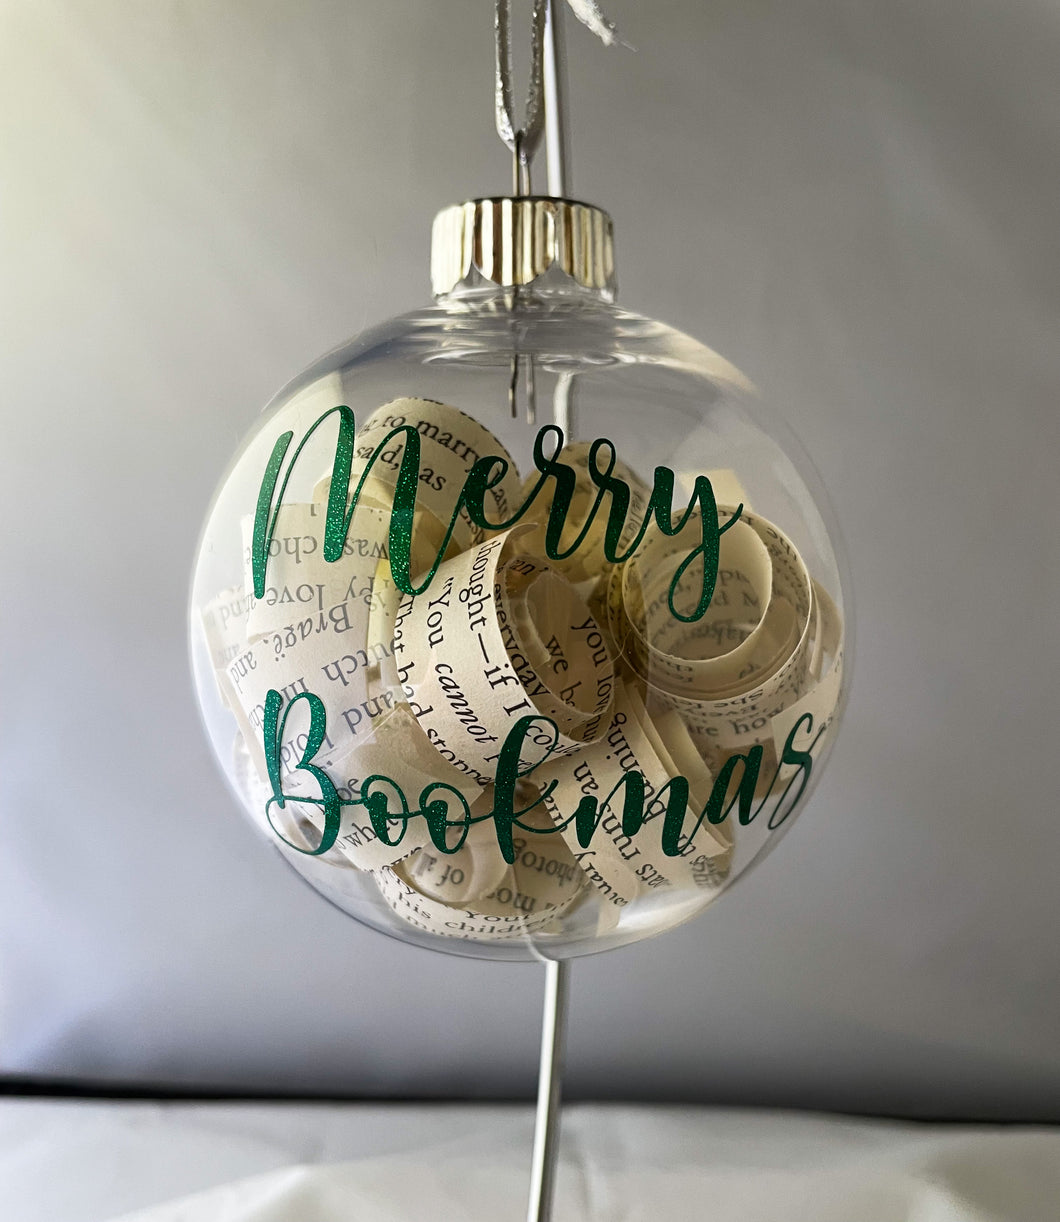 Merry Bookmas Upcycled Book Ornament